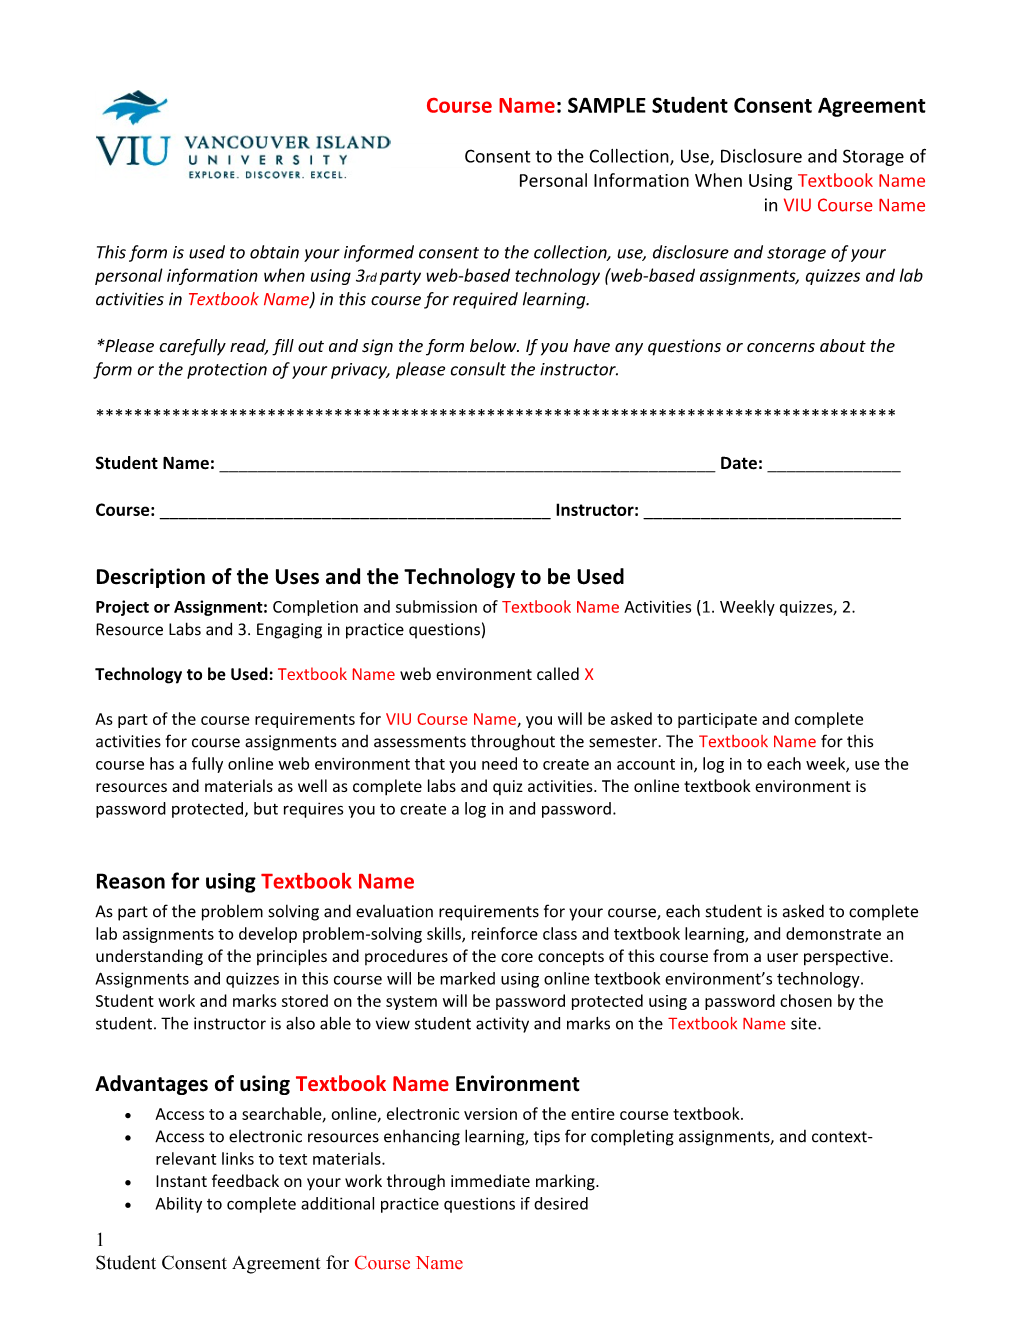 Mcgraw-Hill Connect Student Consent Form